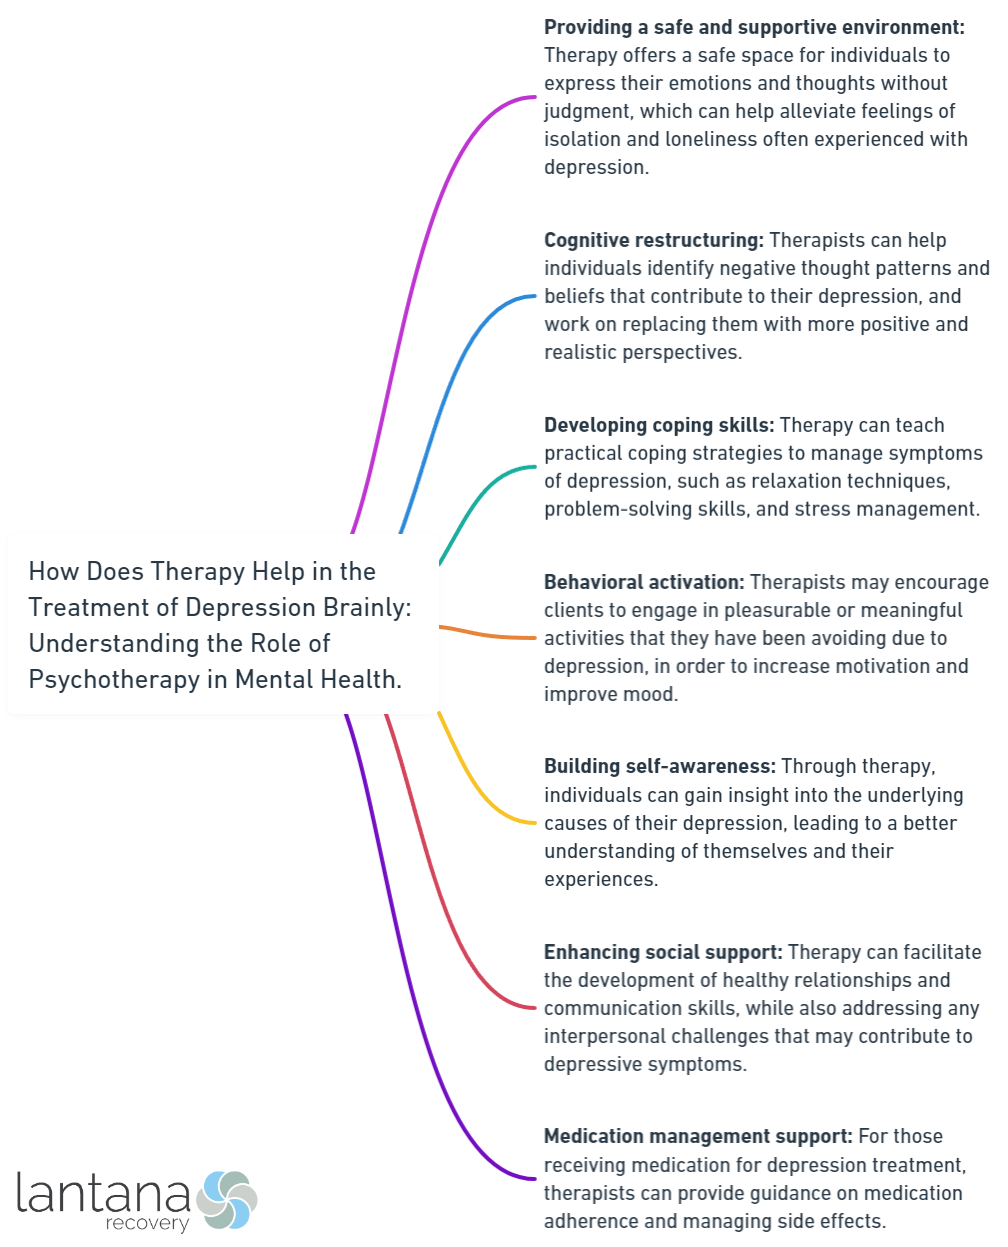 How Does Therapy Help in the Treatment of Depression Brainly_ Understanding the Role of Psychotherapy in Mental Health.